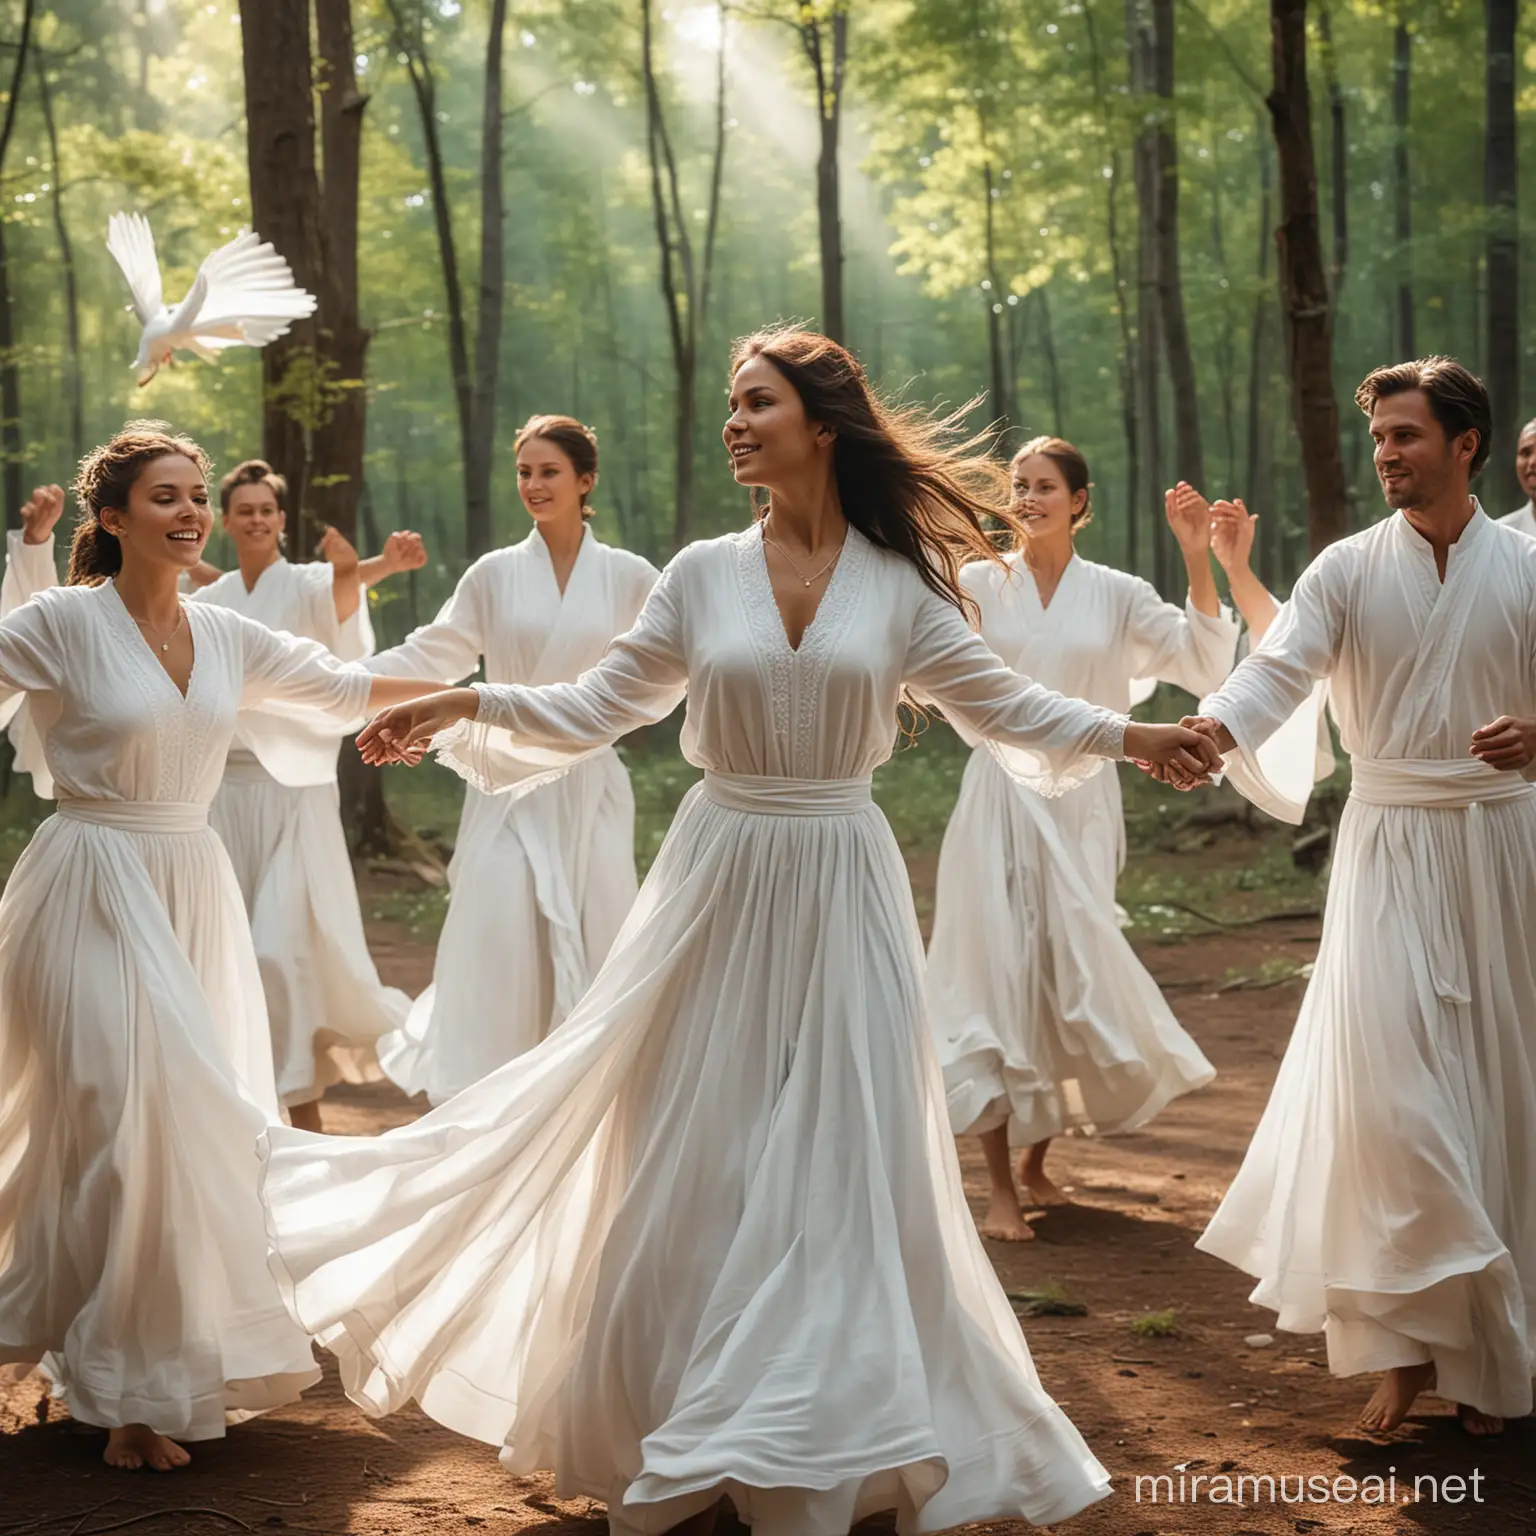 SEMA, WHITE DRESSED, GROUP OF PEOPLE, WHIRLING,  DANCING IN THE FOREST, MAN AND WOMAN FULL DRESSED, RITUAL, SPIRITUAL MEETING, RETREAT, SPIRITUAL LIGHTINING, FOREST BACKROUND, REALISTIC FACE, MAN AND WOMAN FULL DRESSED